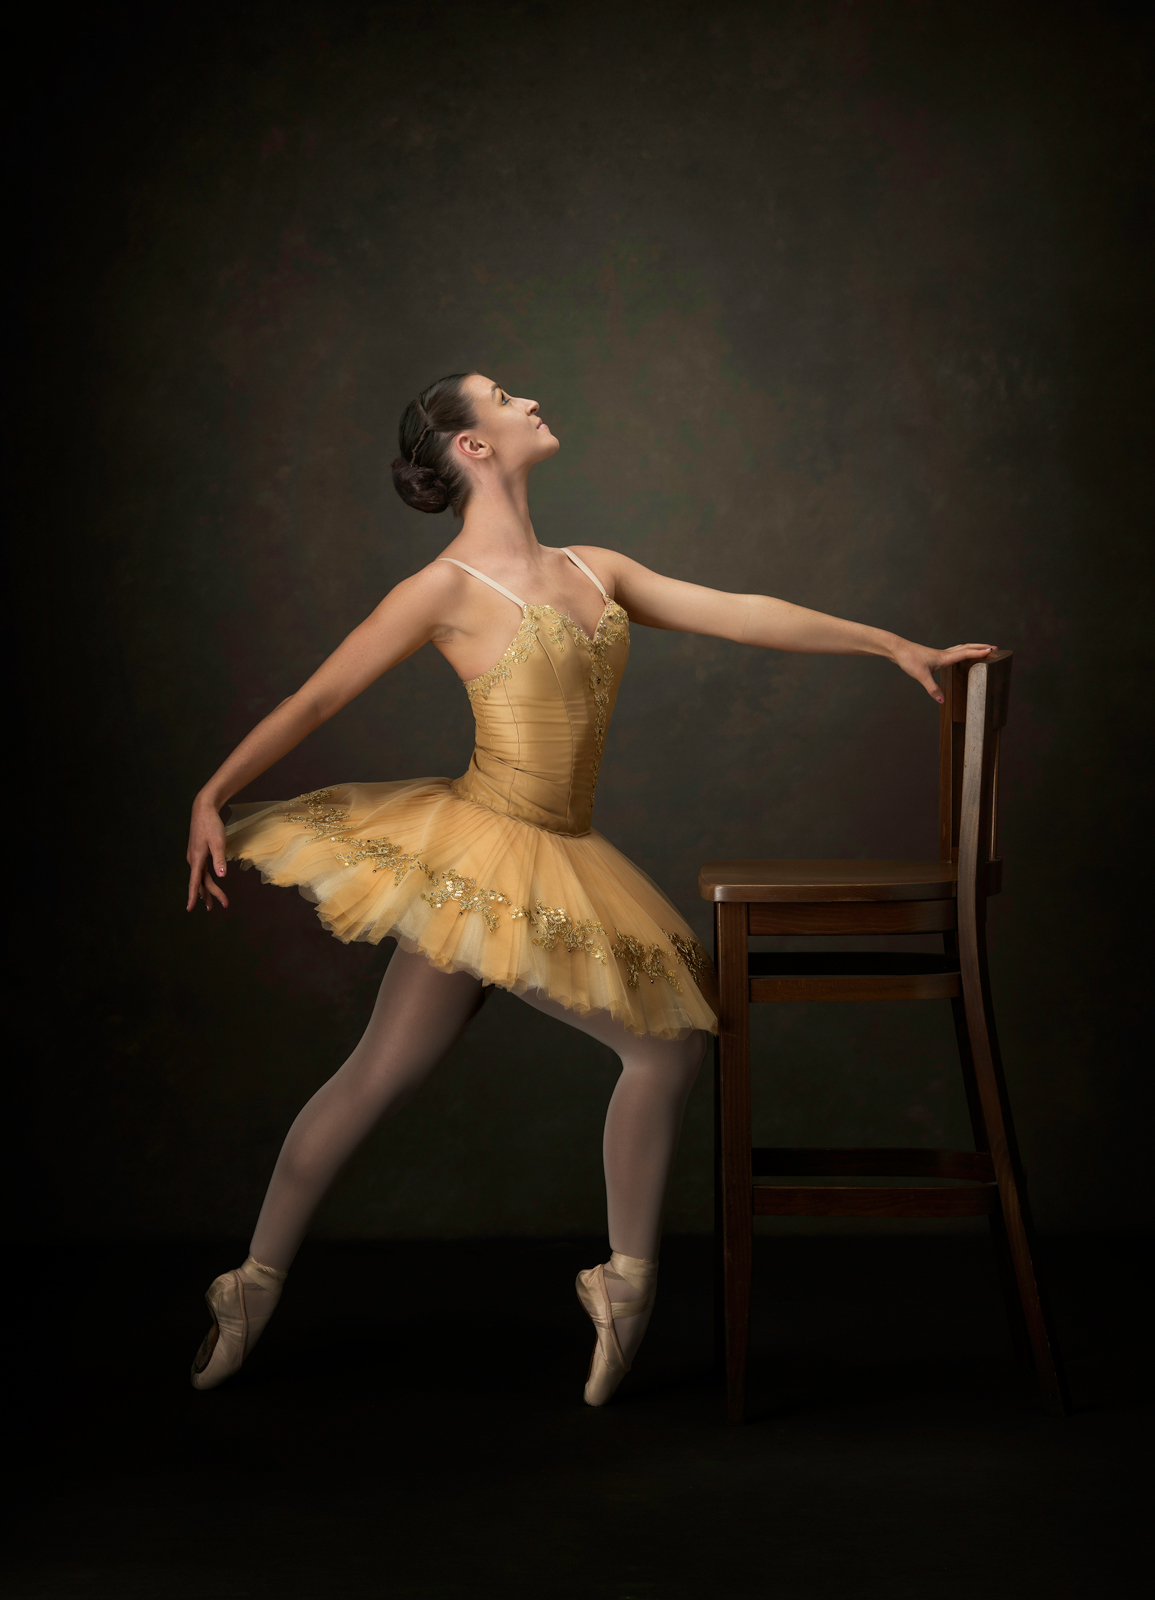 Ballet dancer with chair